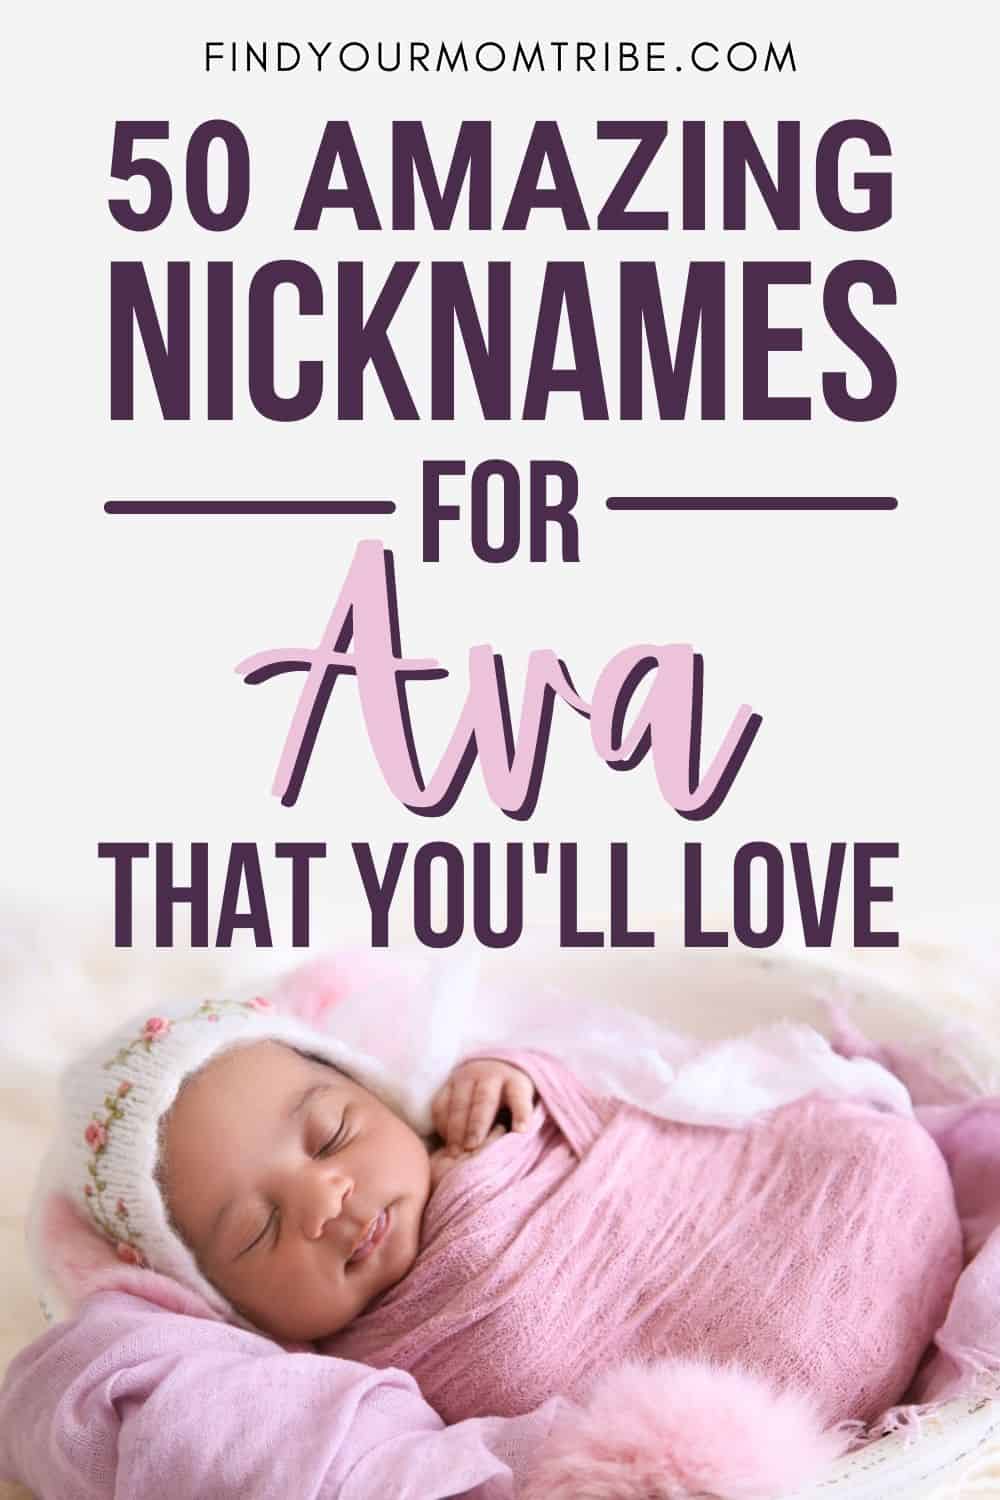 Amazing Nicknames For Ava You’ll Fall In Love With Pinterest